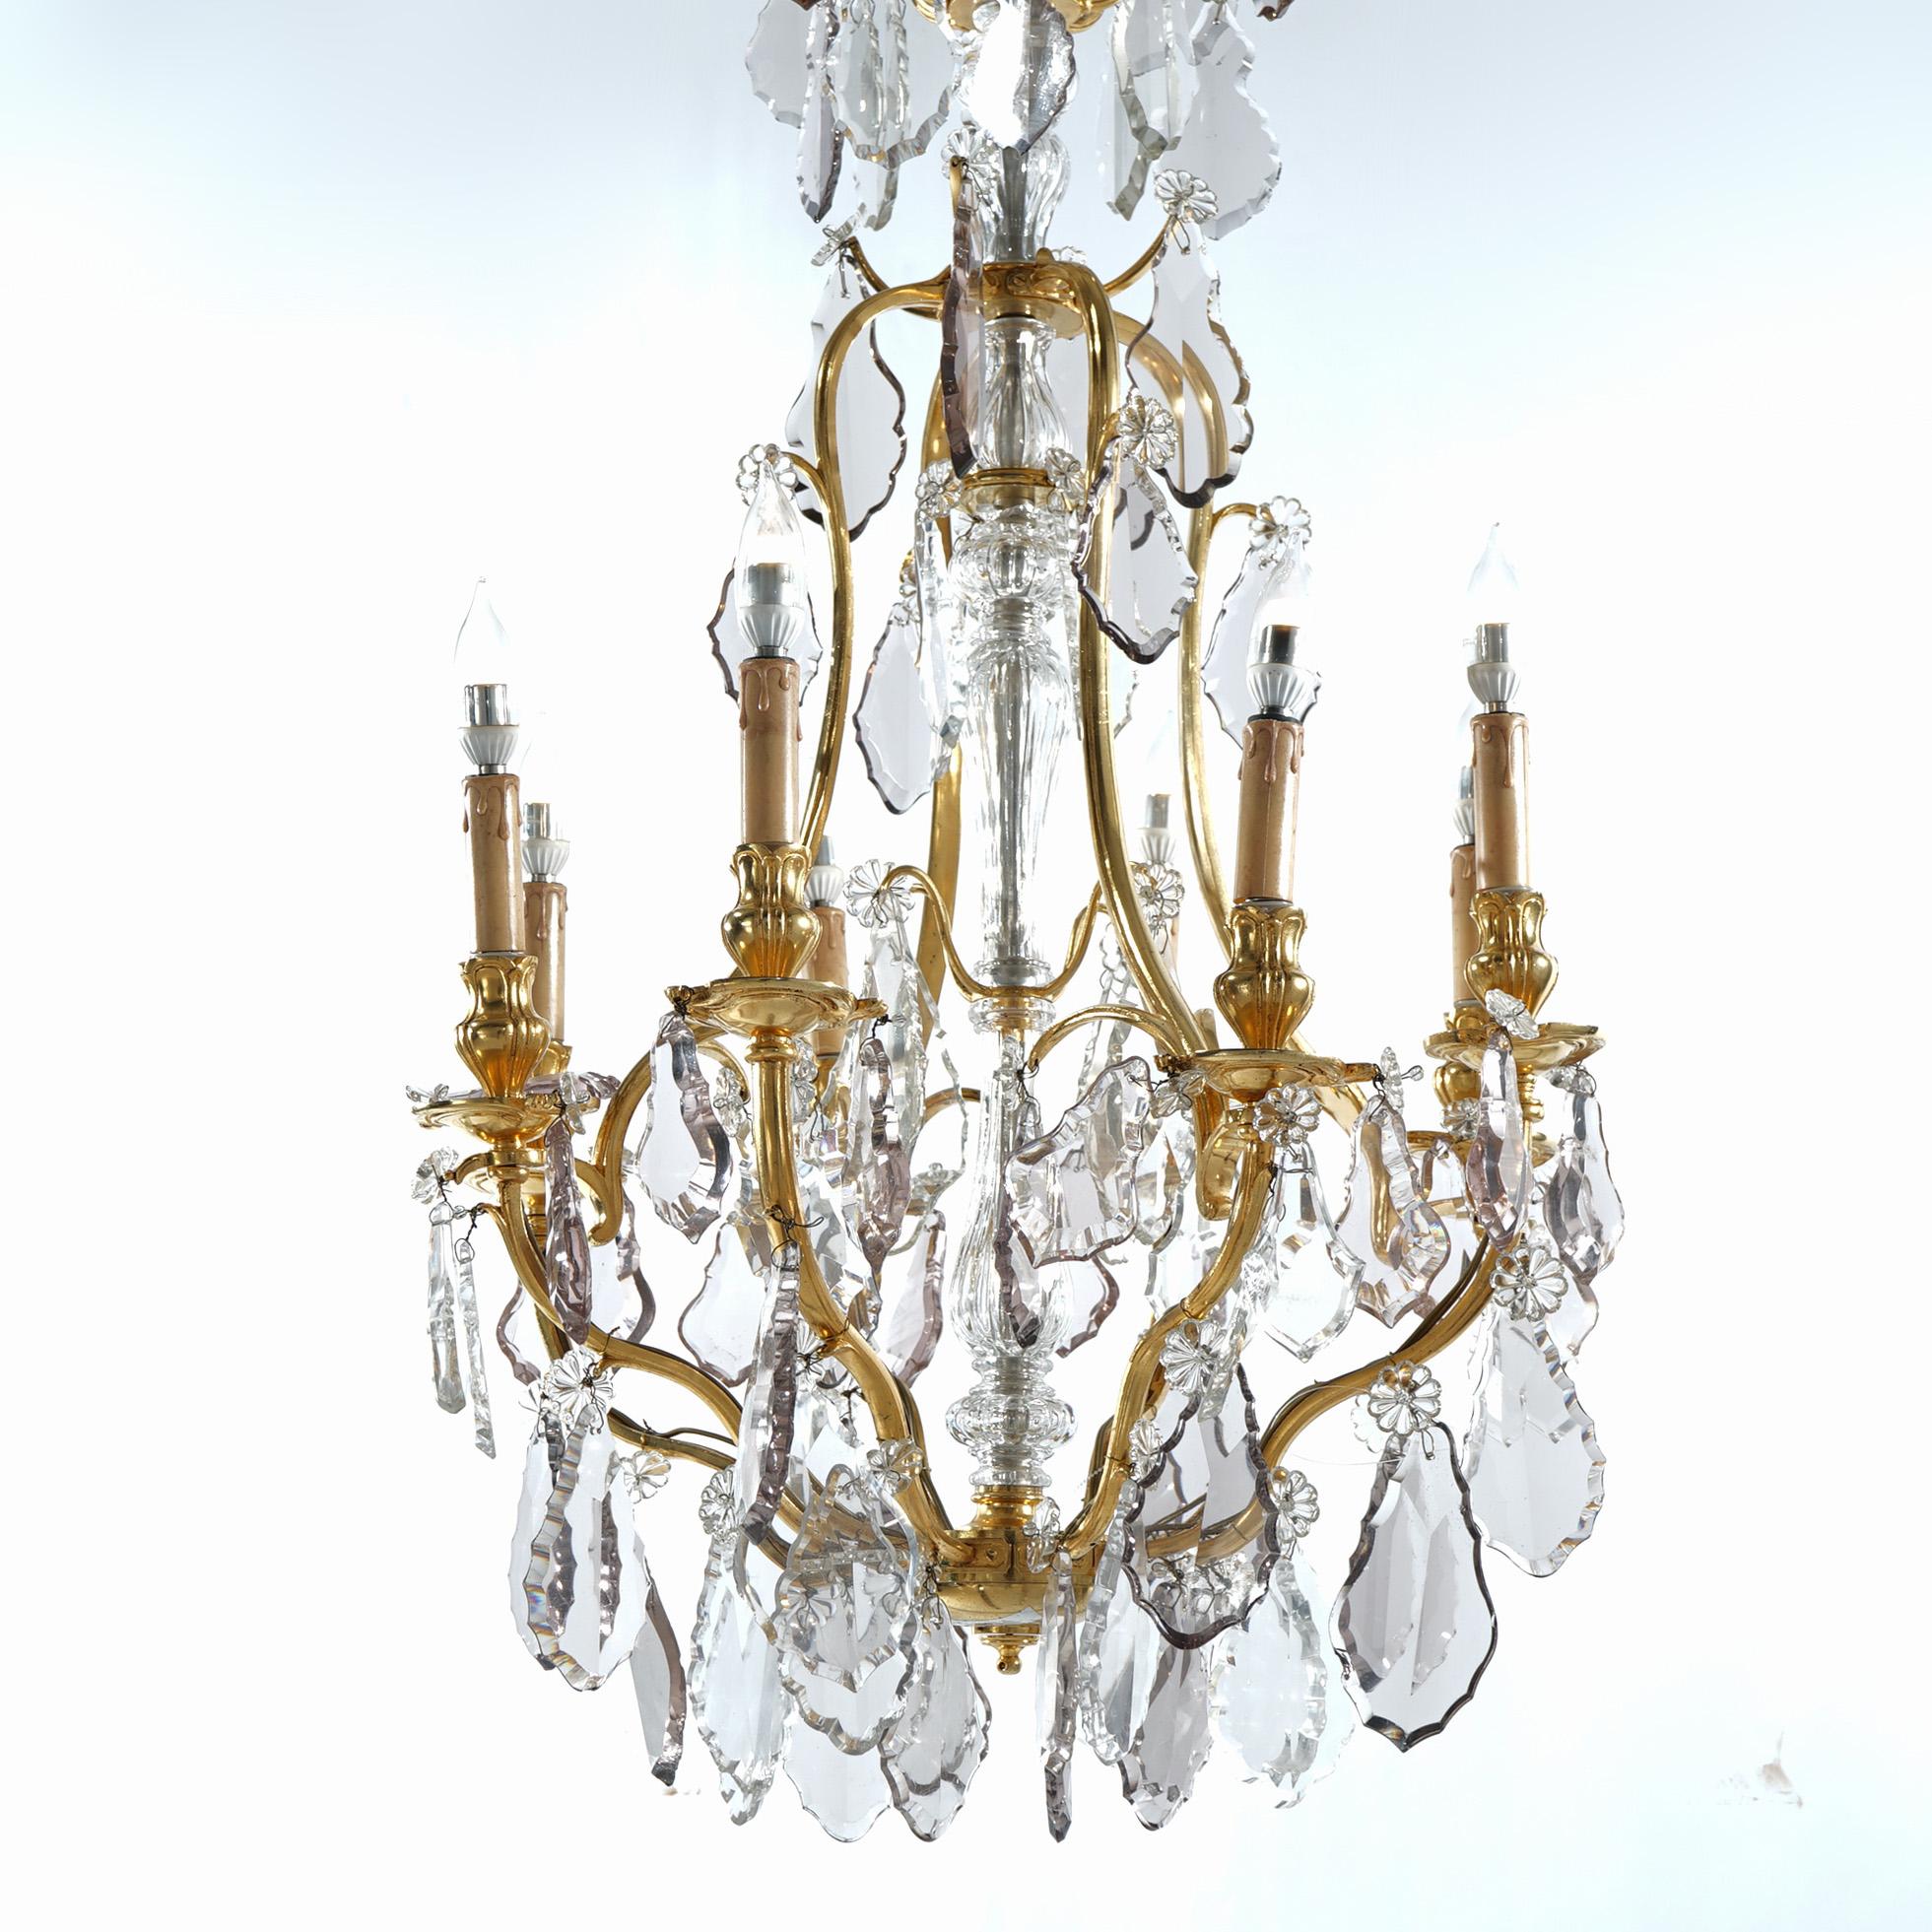 French Louis XIV Style Gilt Bronze & Chrystal 8-Light Chandelier 20th C 3